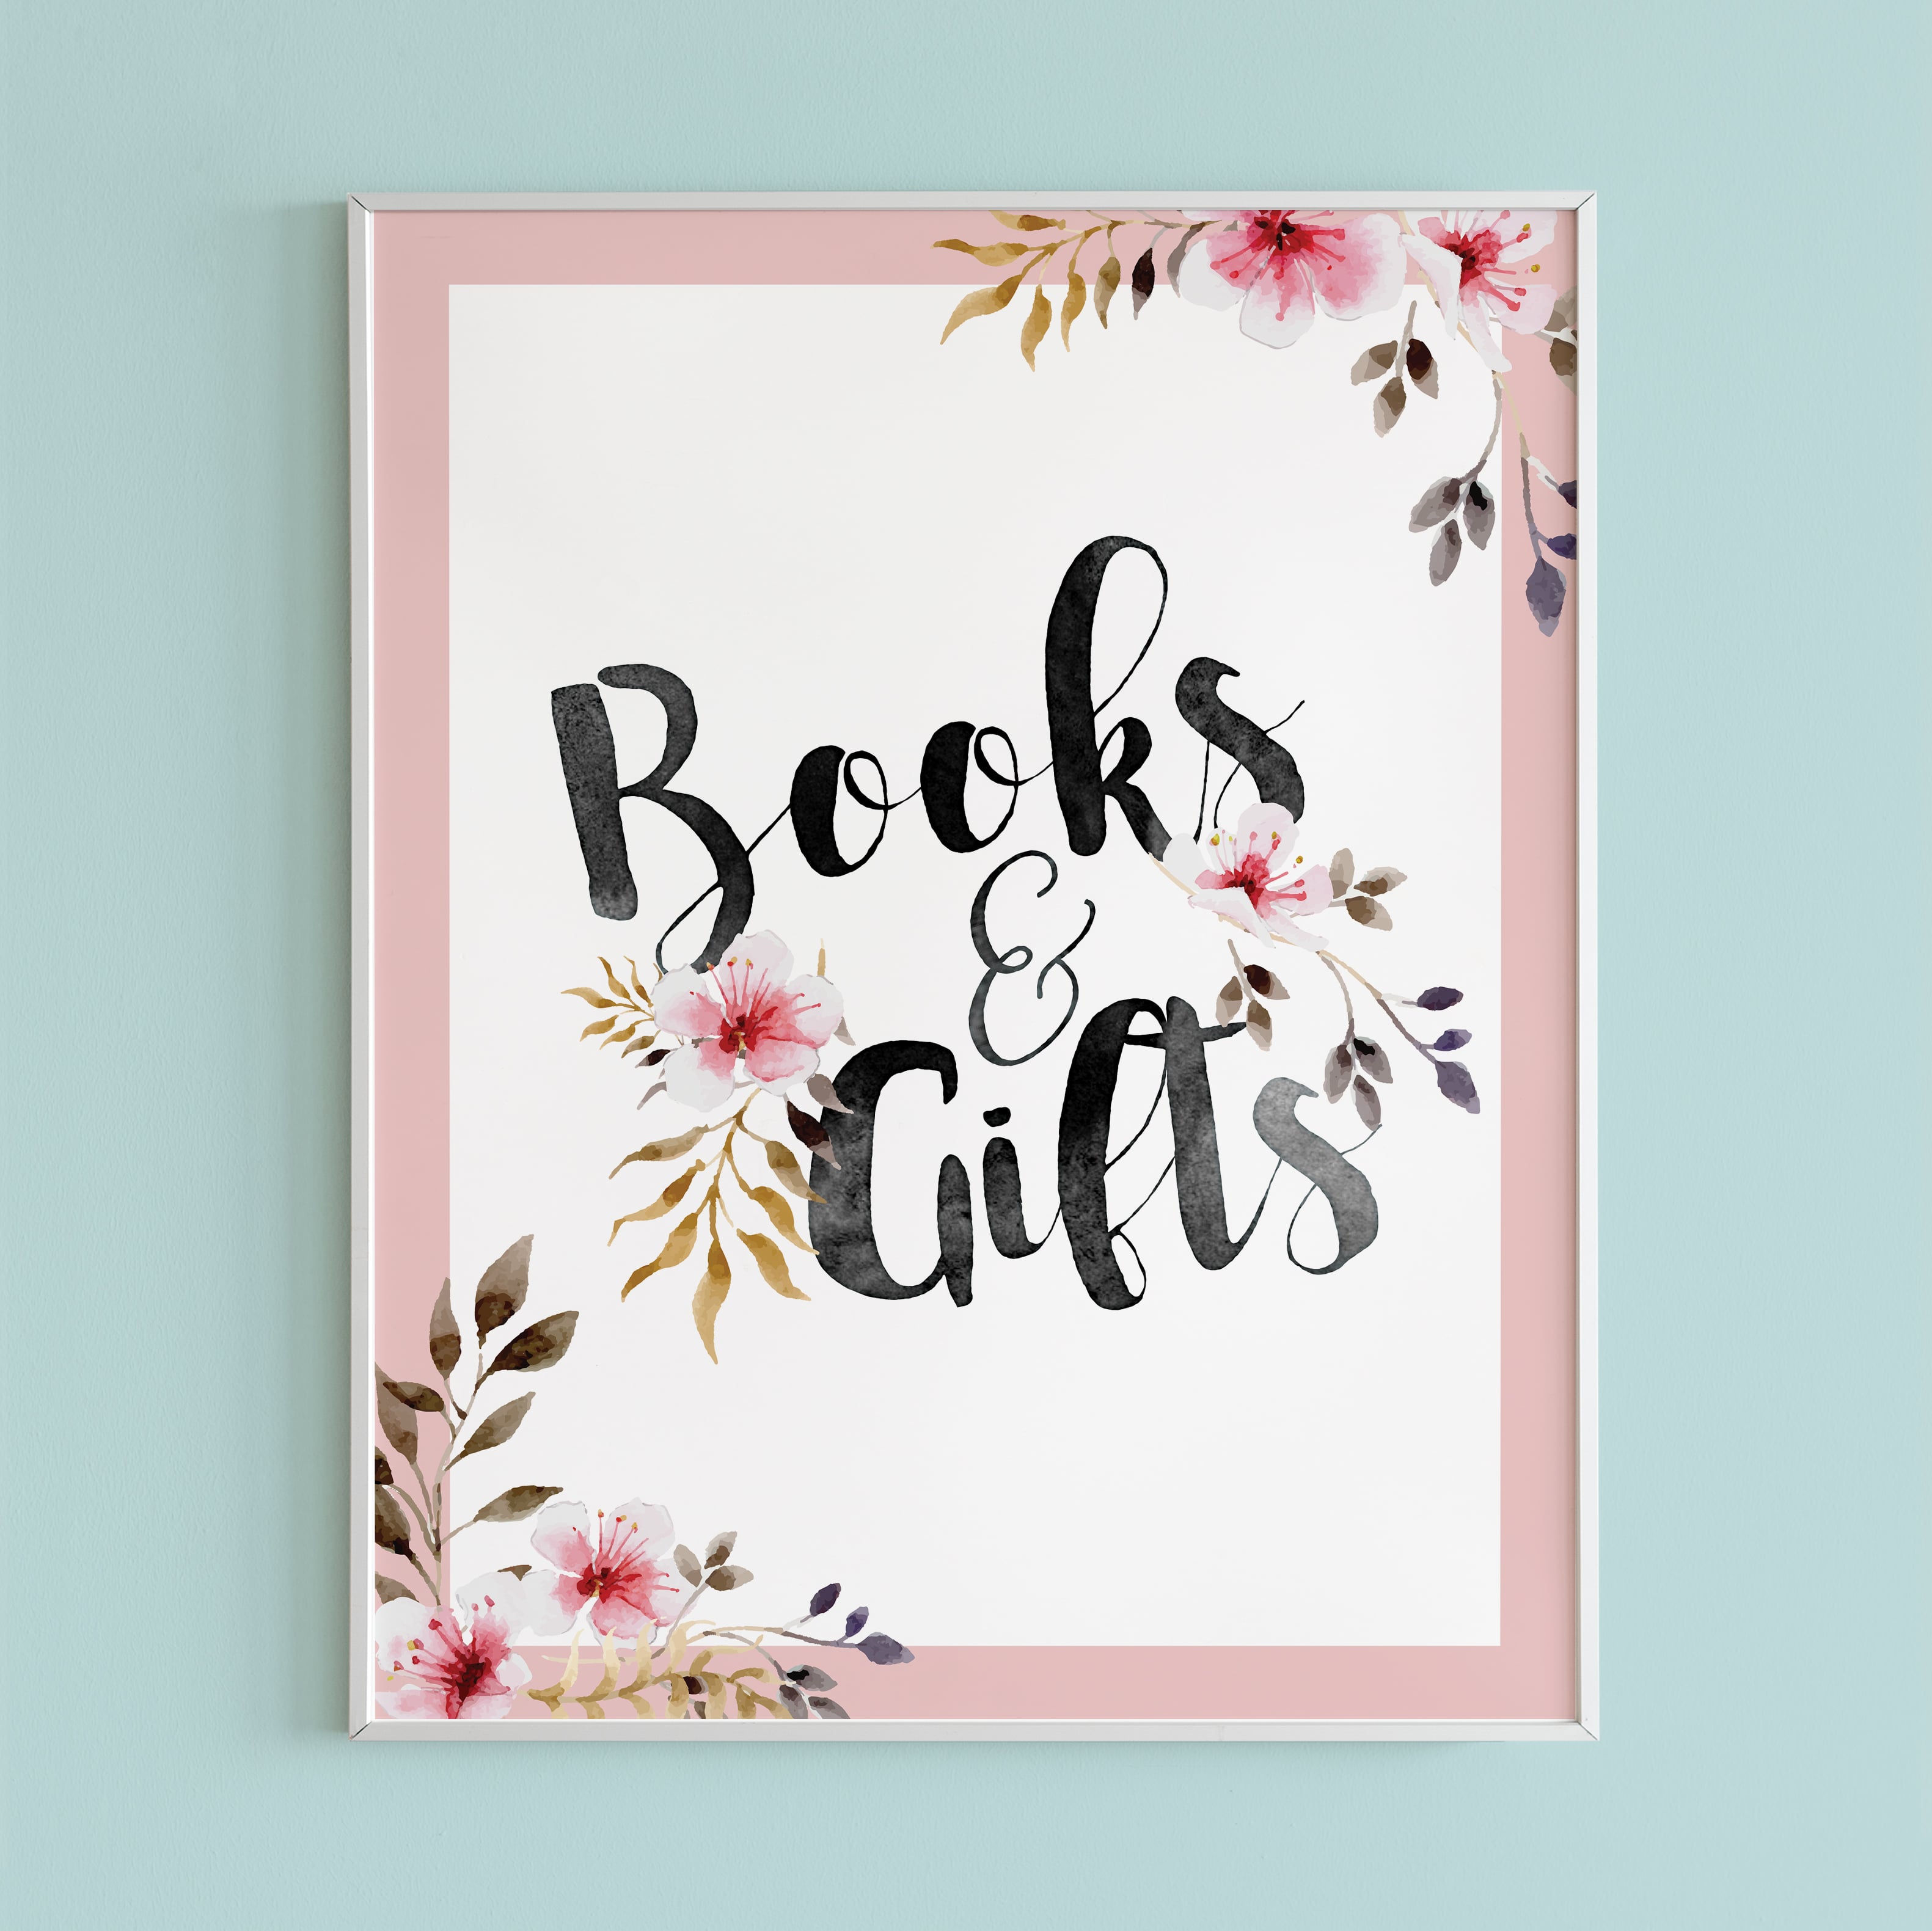 Books and gifts table sign with pink flowers by LittleSizzle